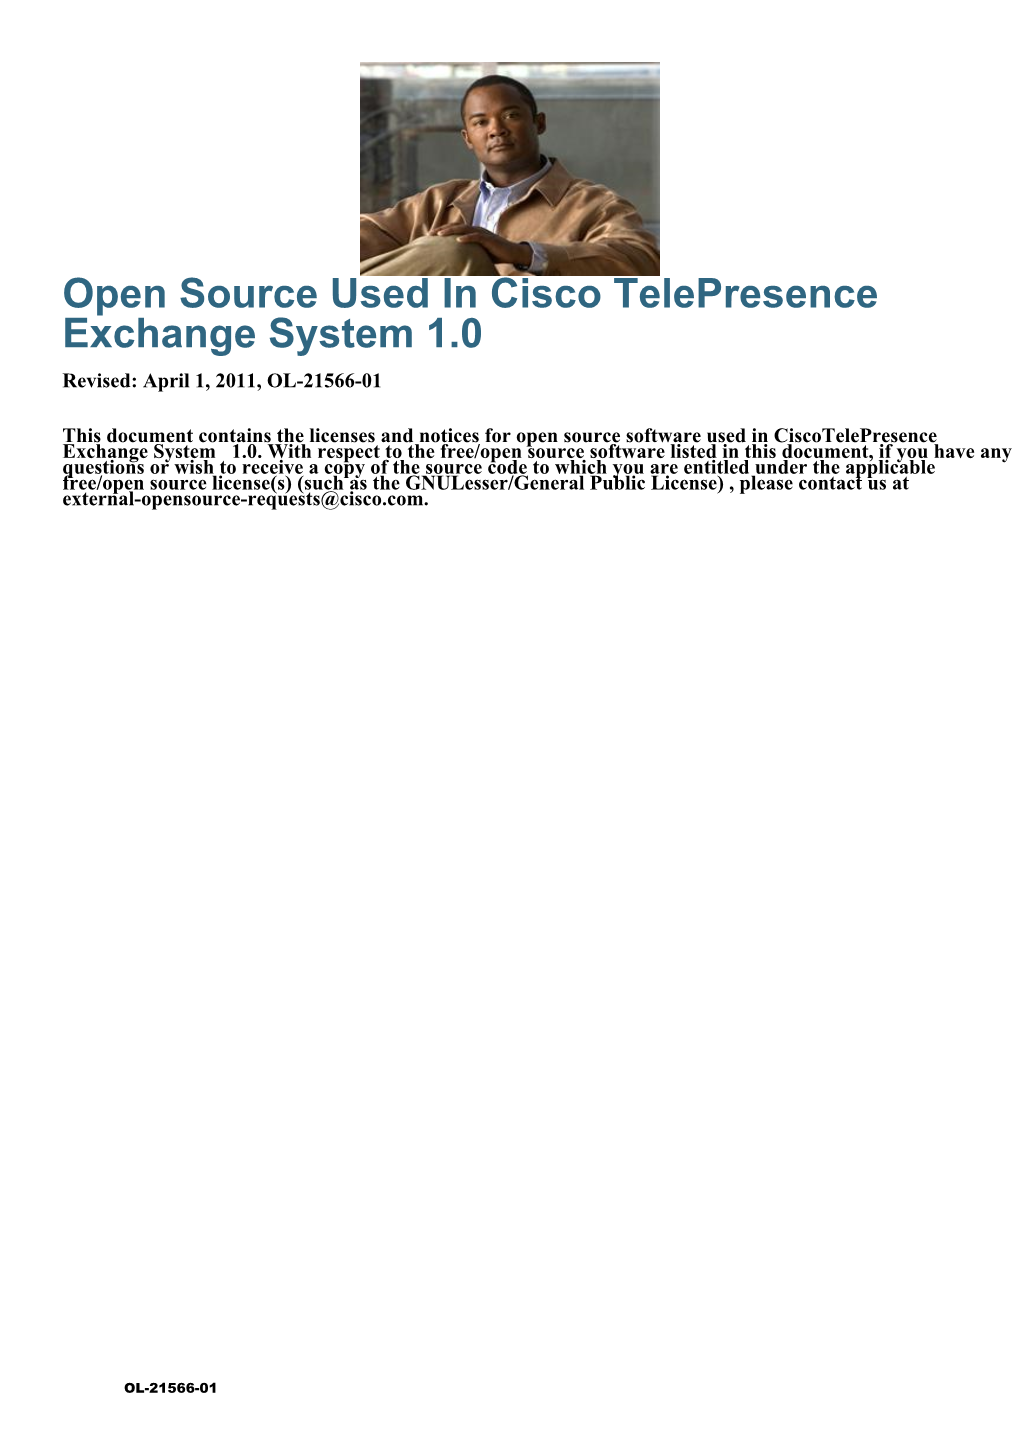 Open Source Used in Cisco Telepresence Exchange System 1.0 Revised: April 1, 2011, OL-21566-01